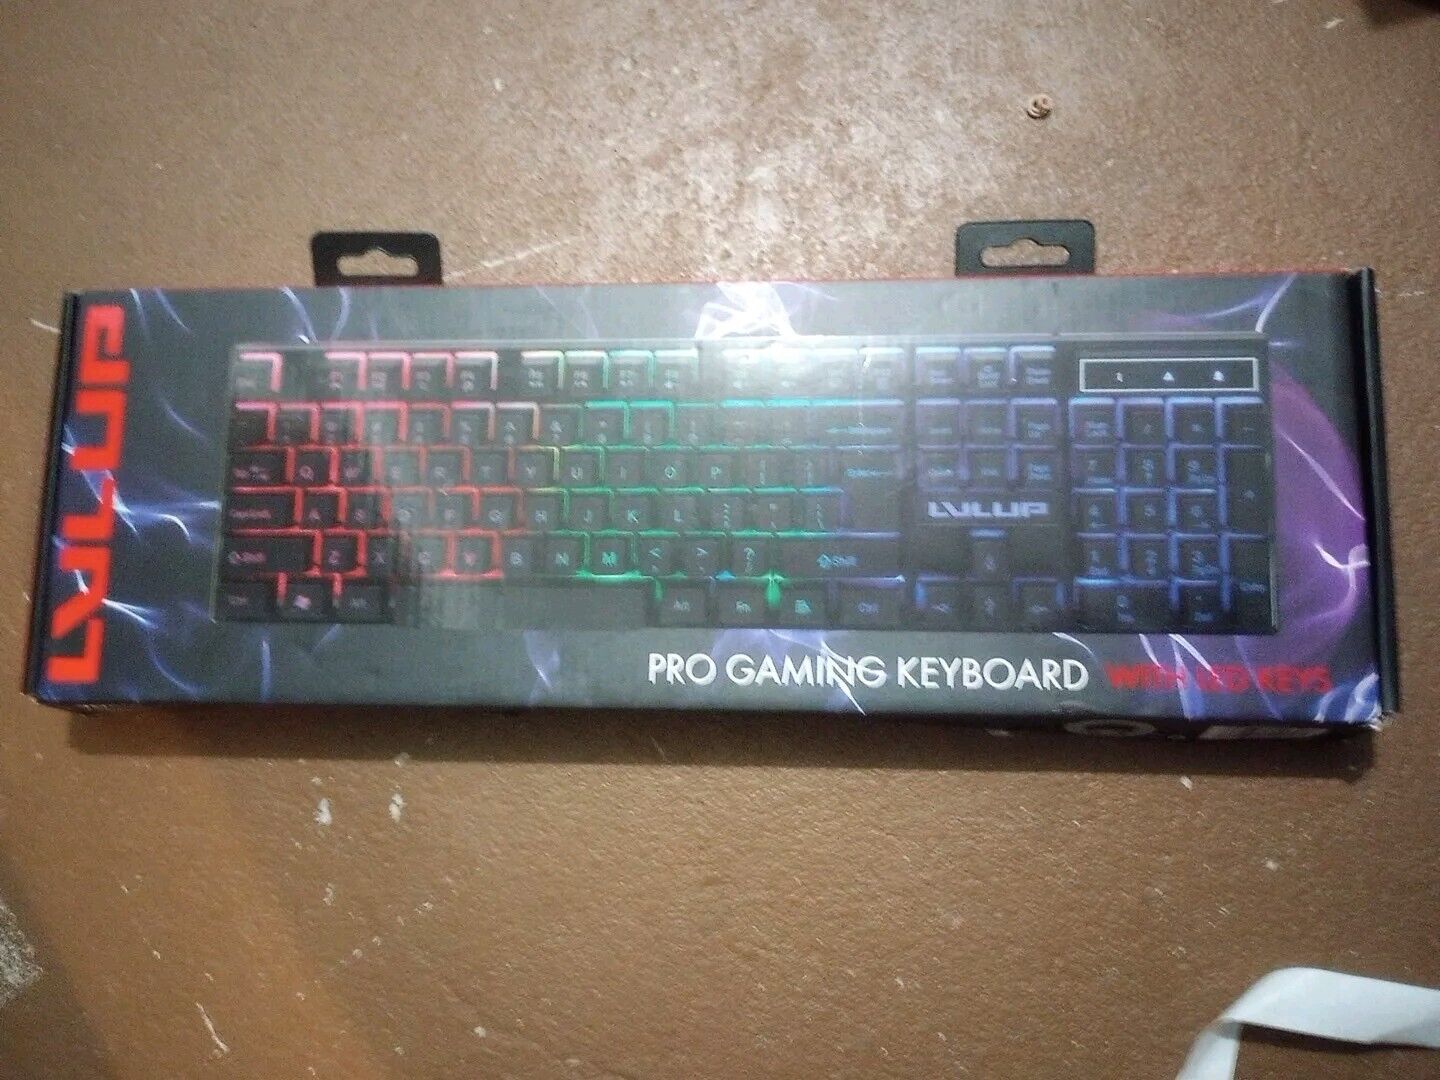 Lvlup Pro Gaming Keyboard with Light Up Colors LED Keys LU734 - NEW-Unopened